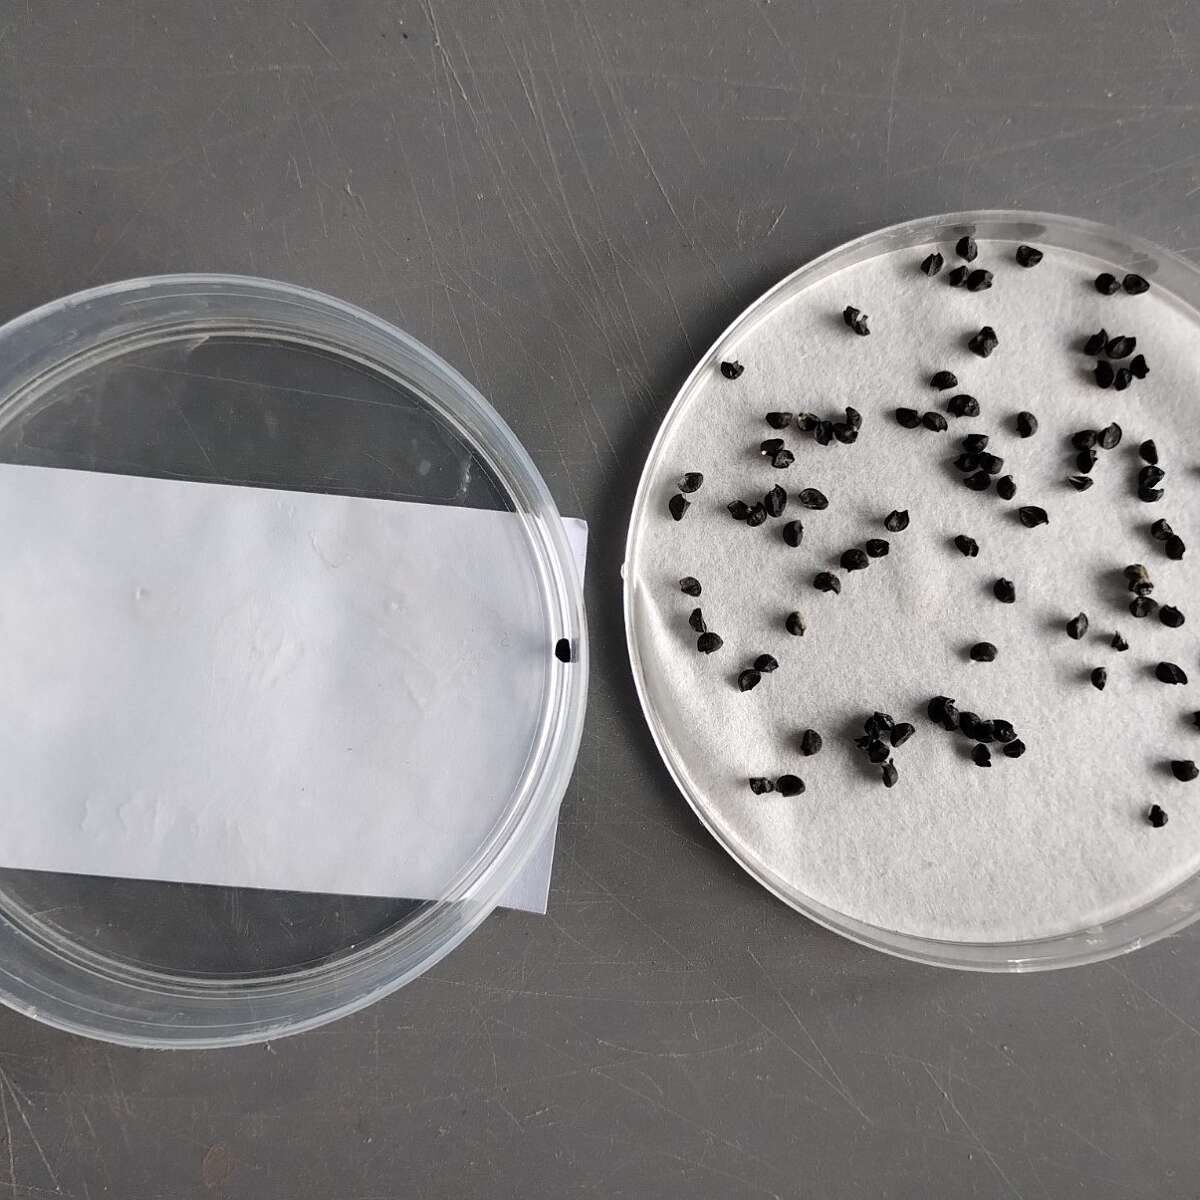 Seeds inside a petri dish being tested for germination